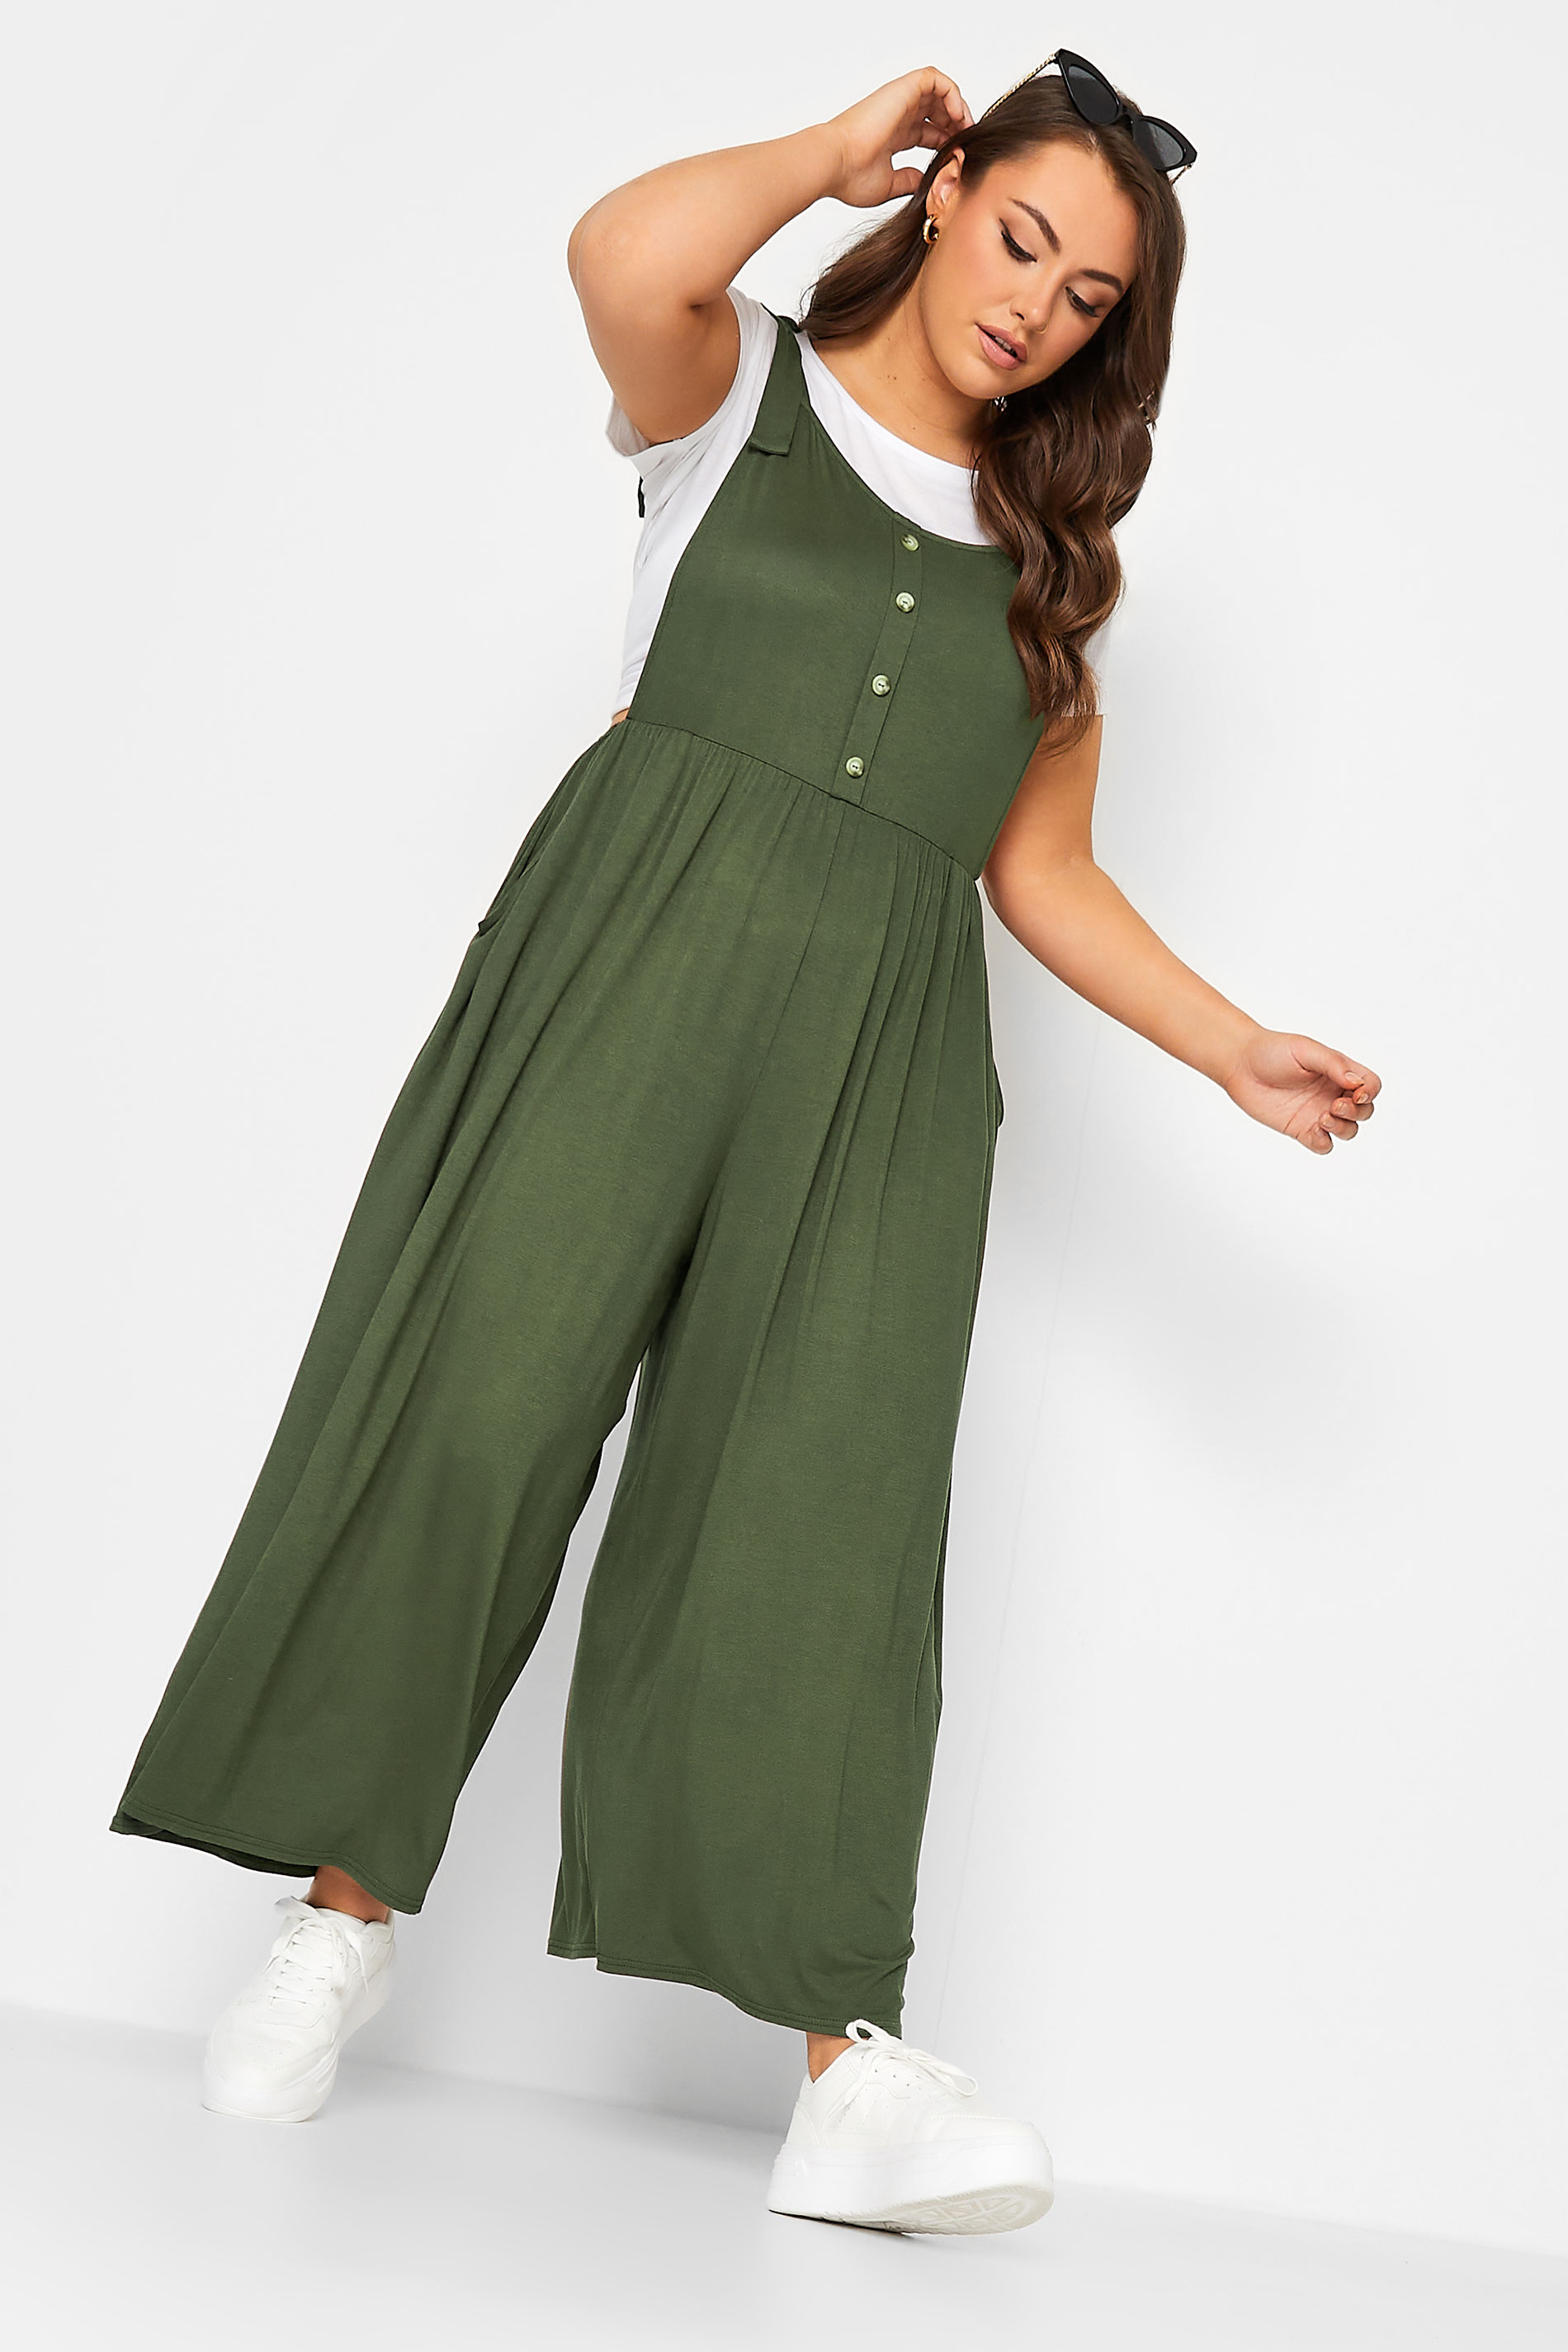 LIMITED COLLECTION Plus Size Khaki Green Culotte Dungarees | Yours Clothing 1